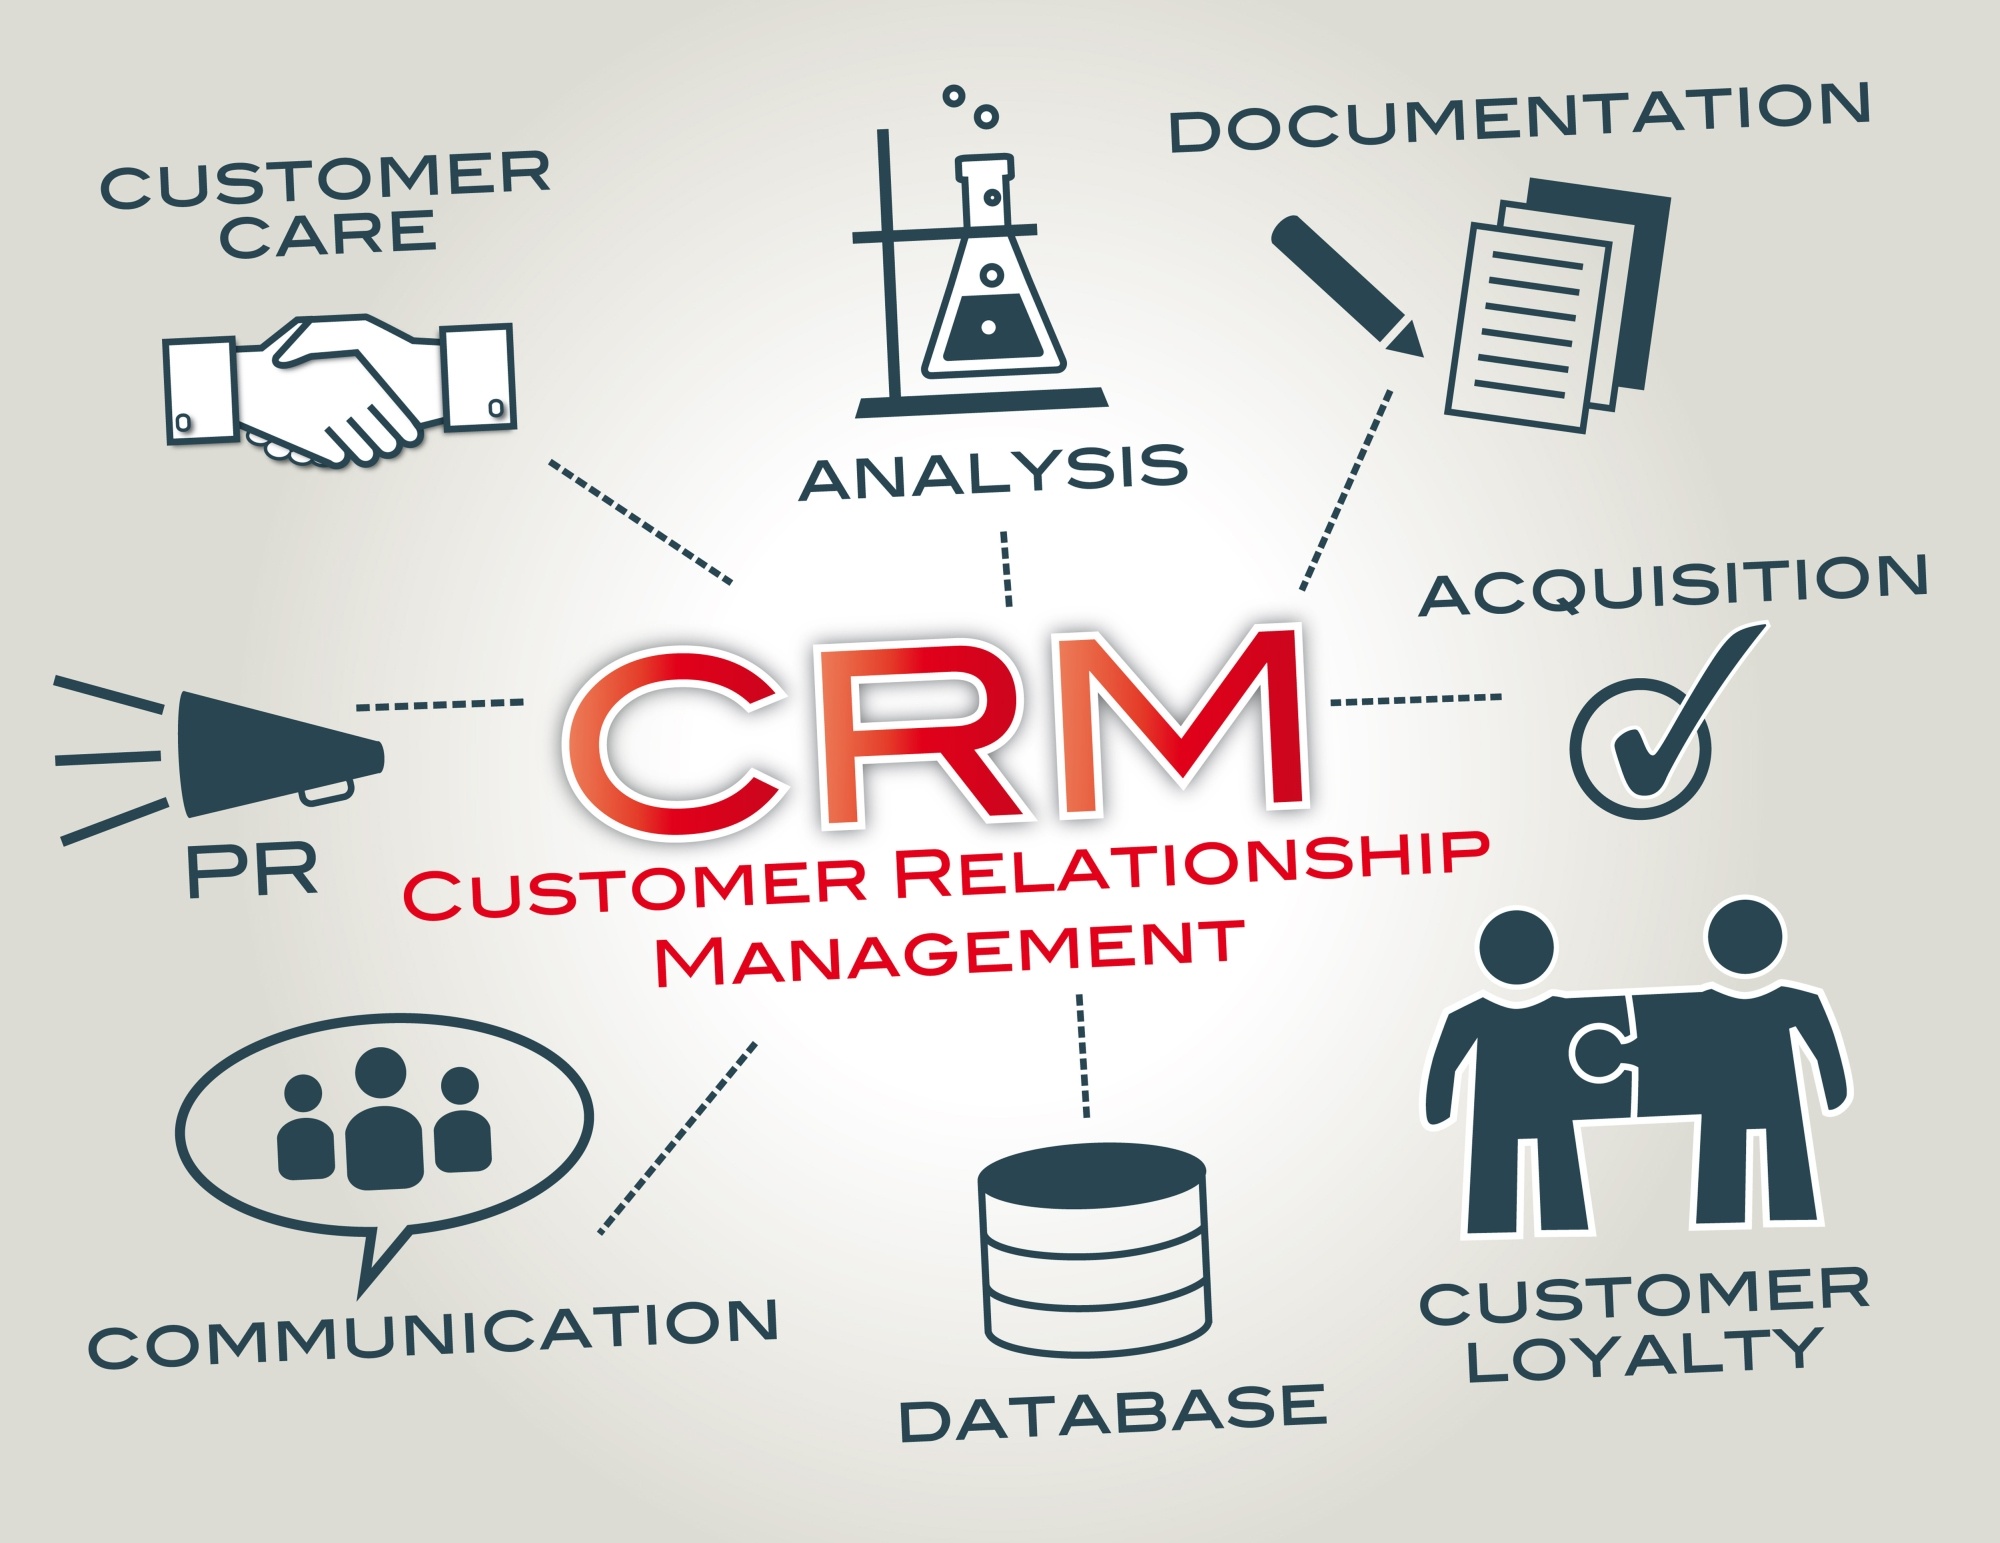 Top Benefits of Adopting a CRM System